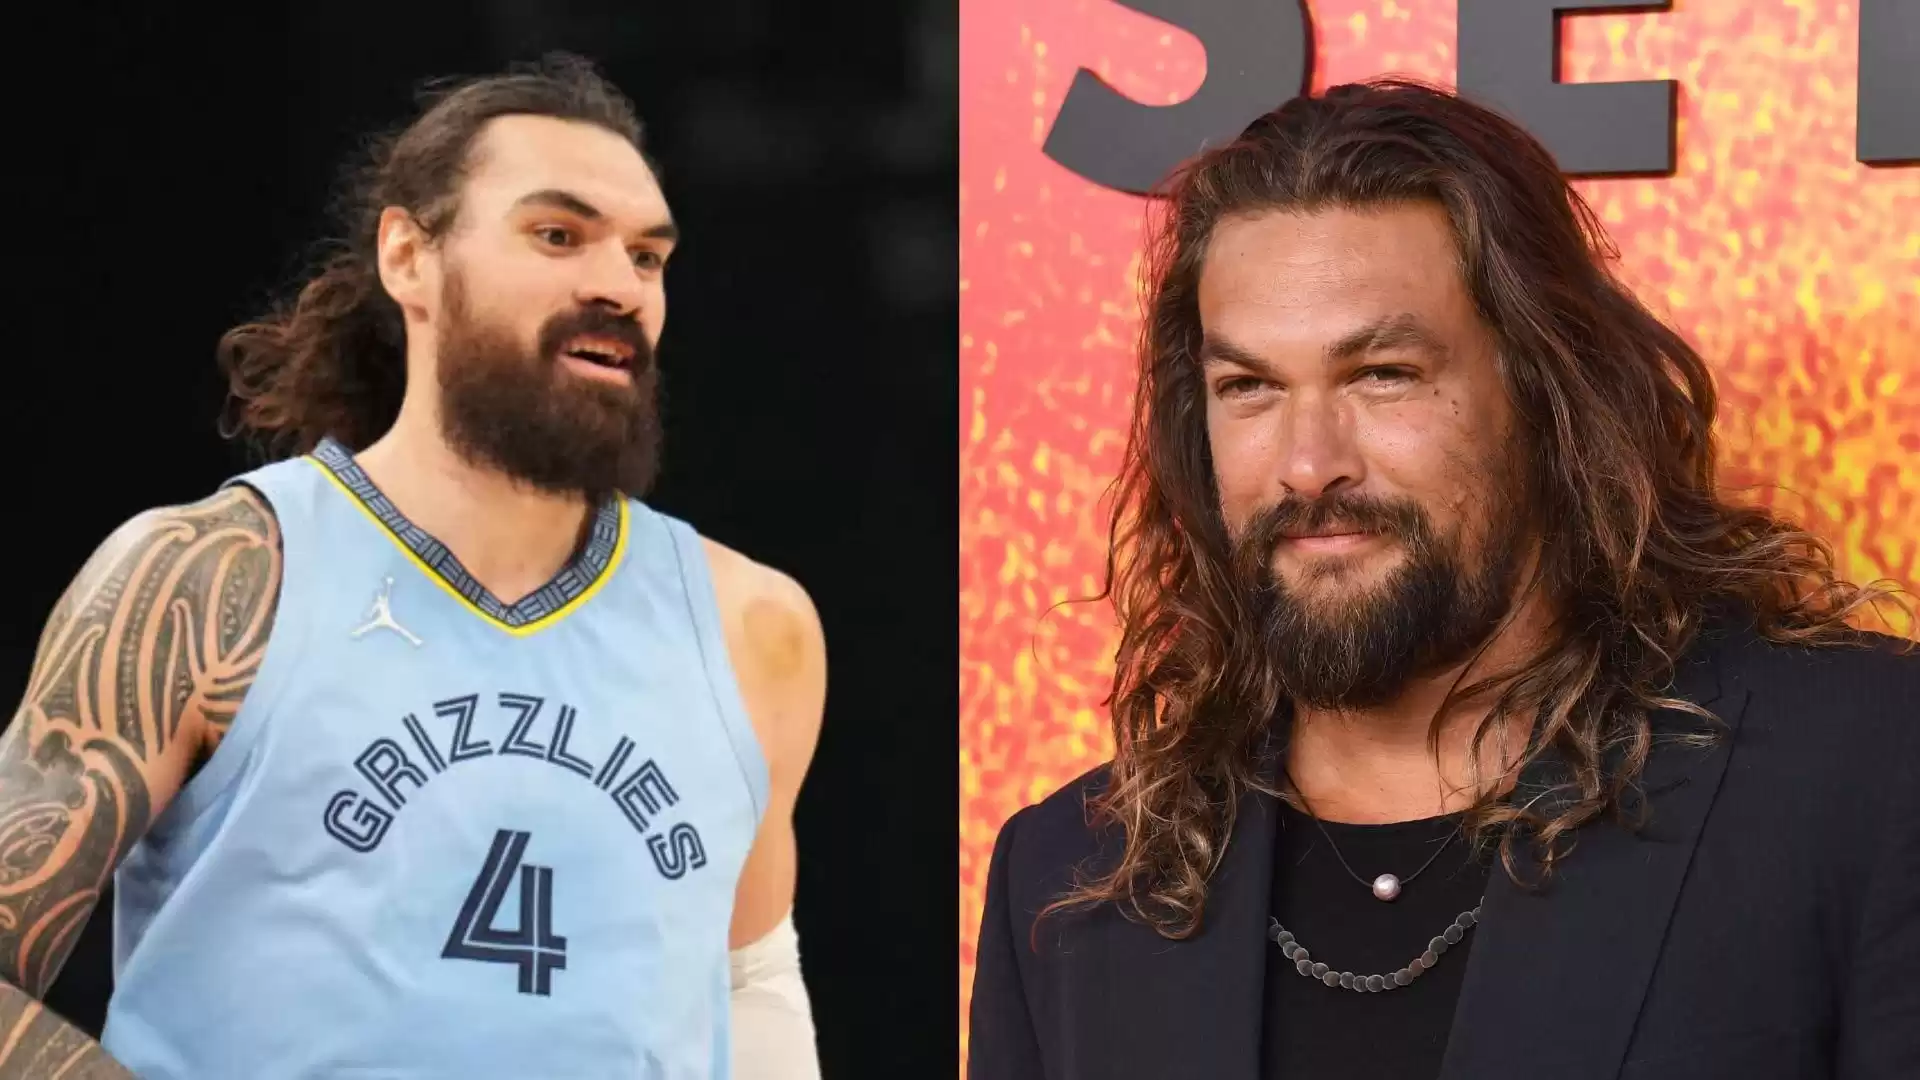 "Why is Steven Adams linked to Jason Momoa? Reasons behind Aquaman nickname for Grizzlies big man"